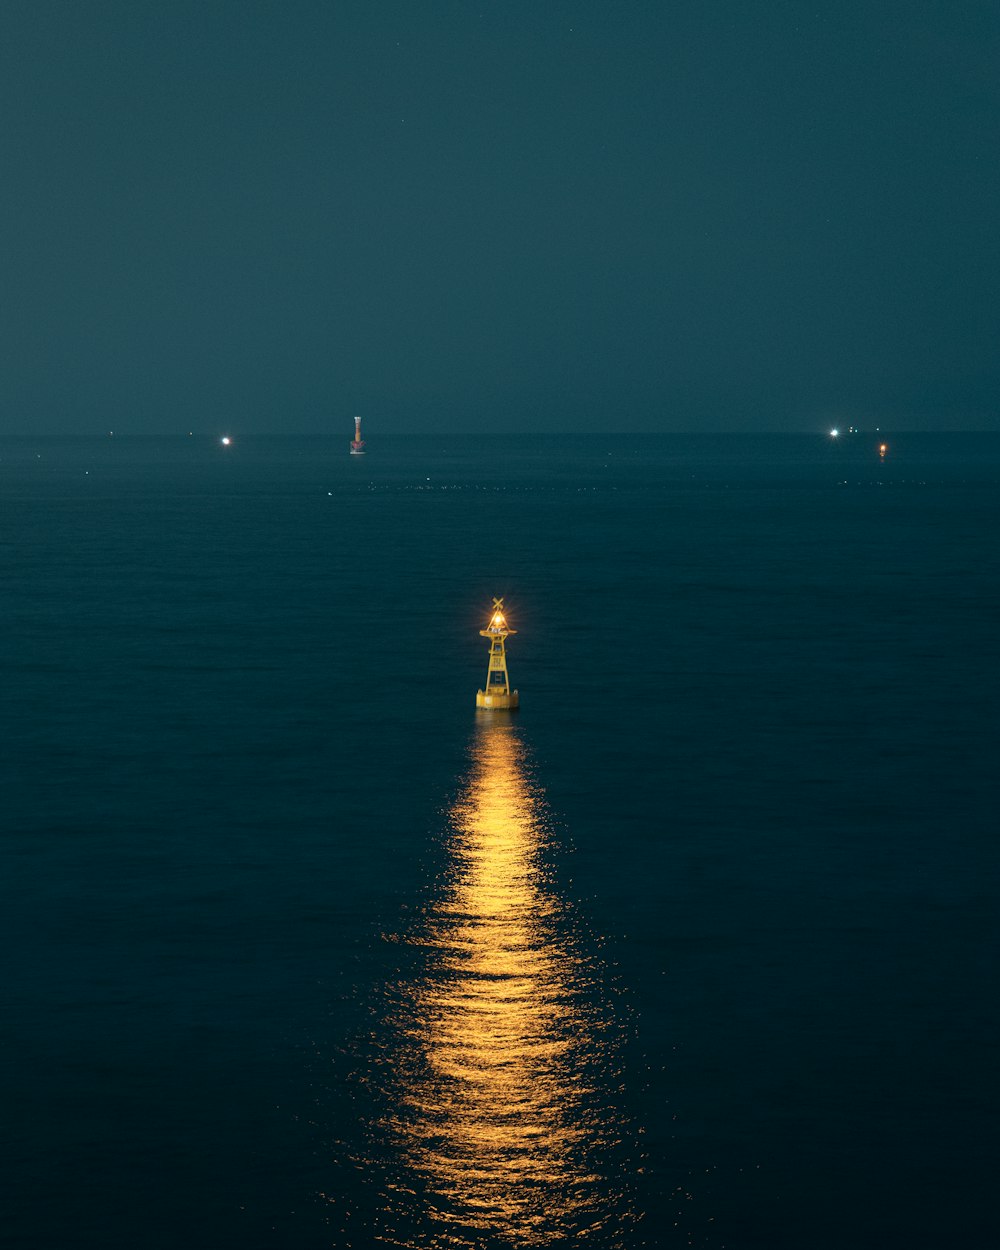 a full moon shines brightly on the water